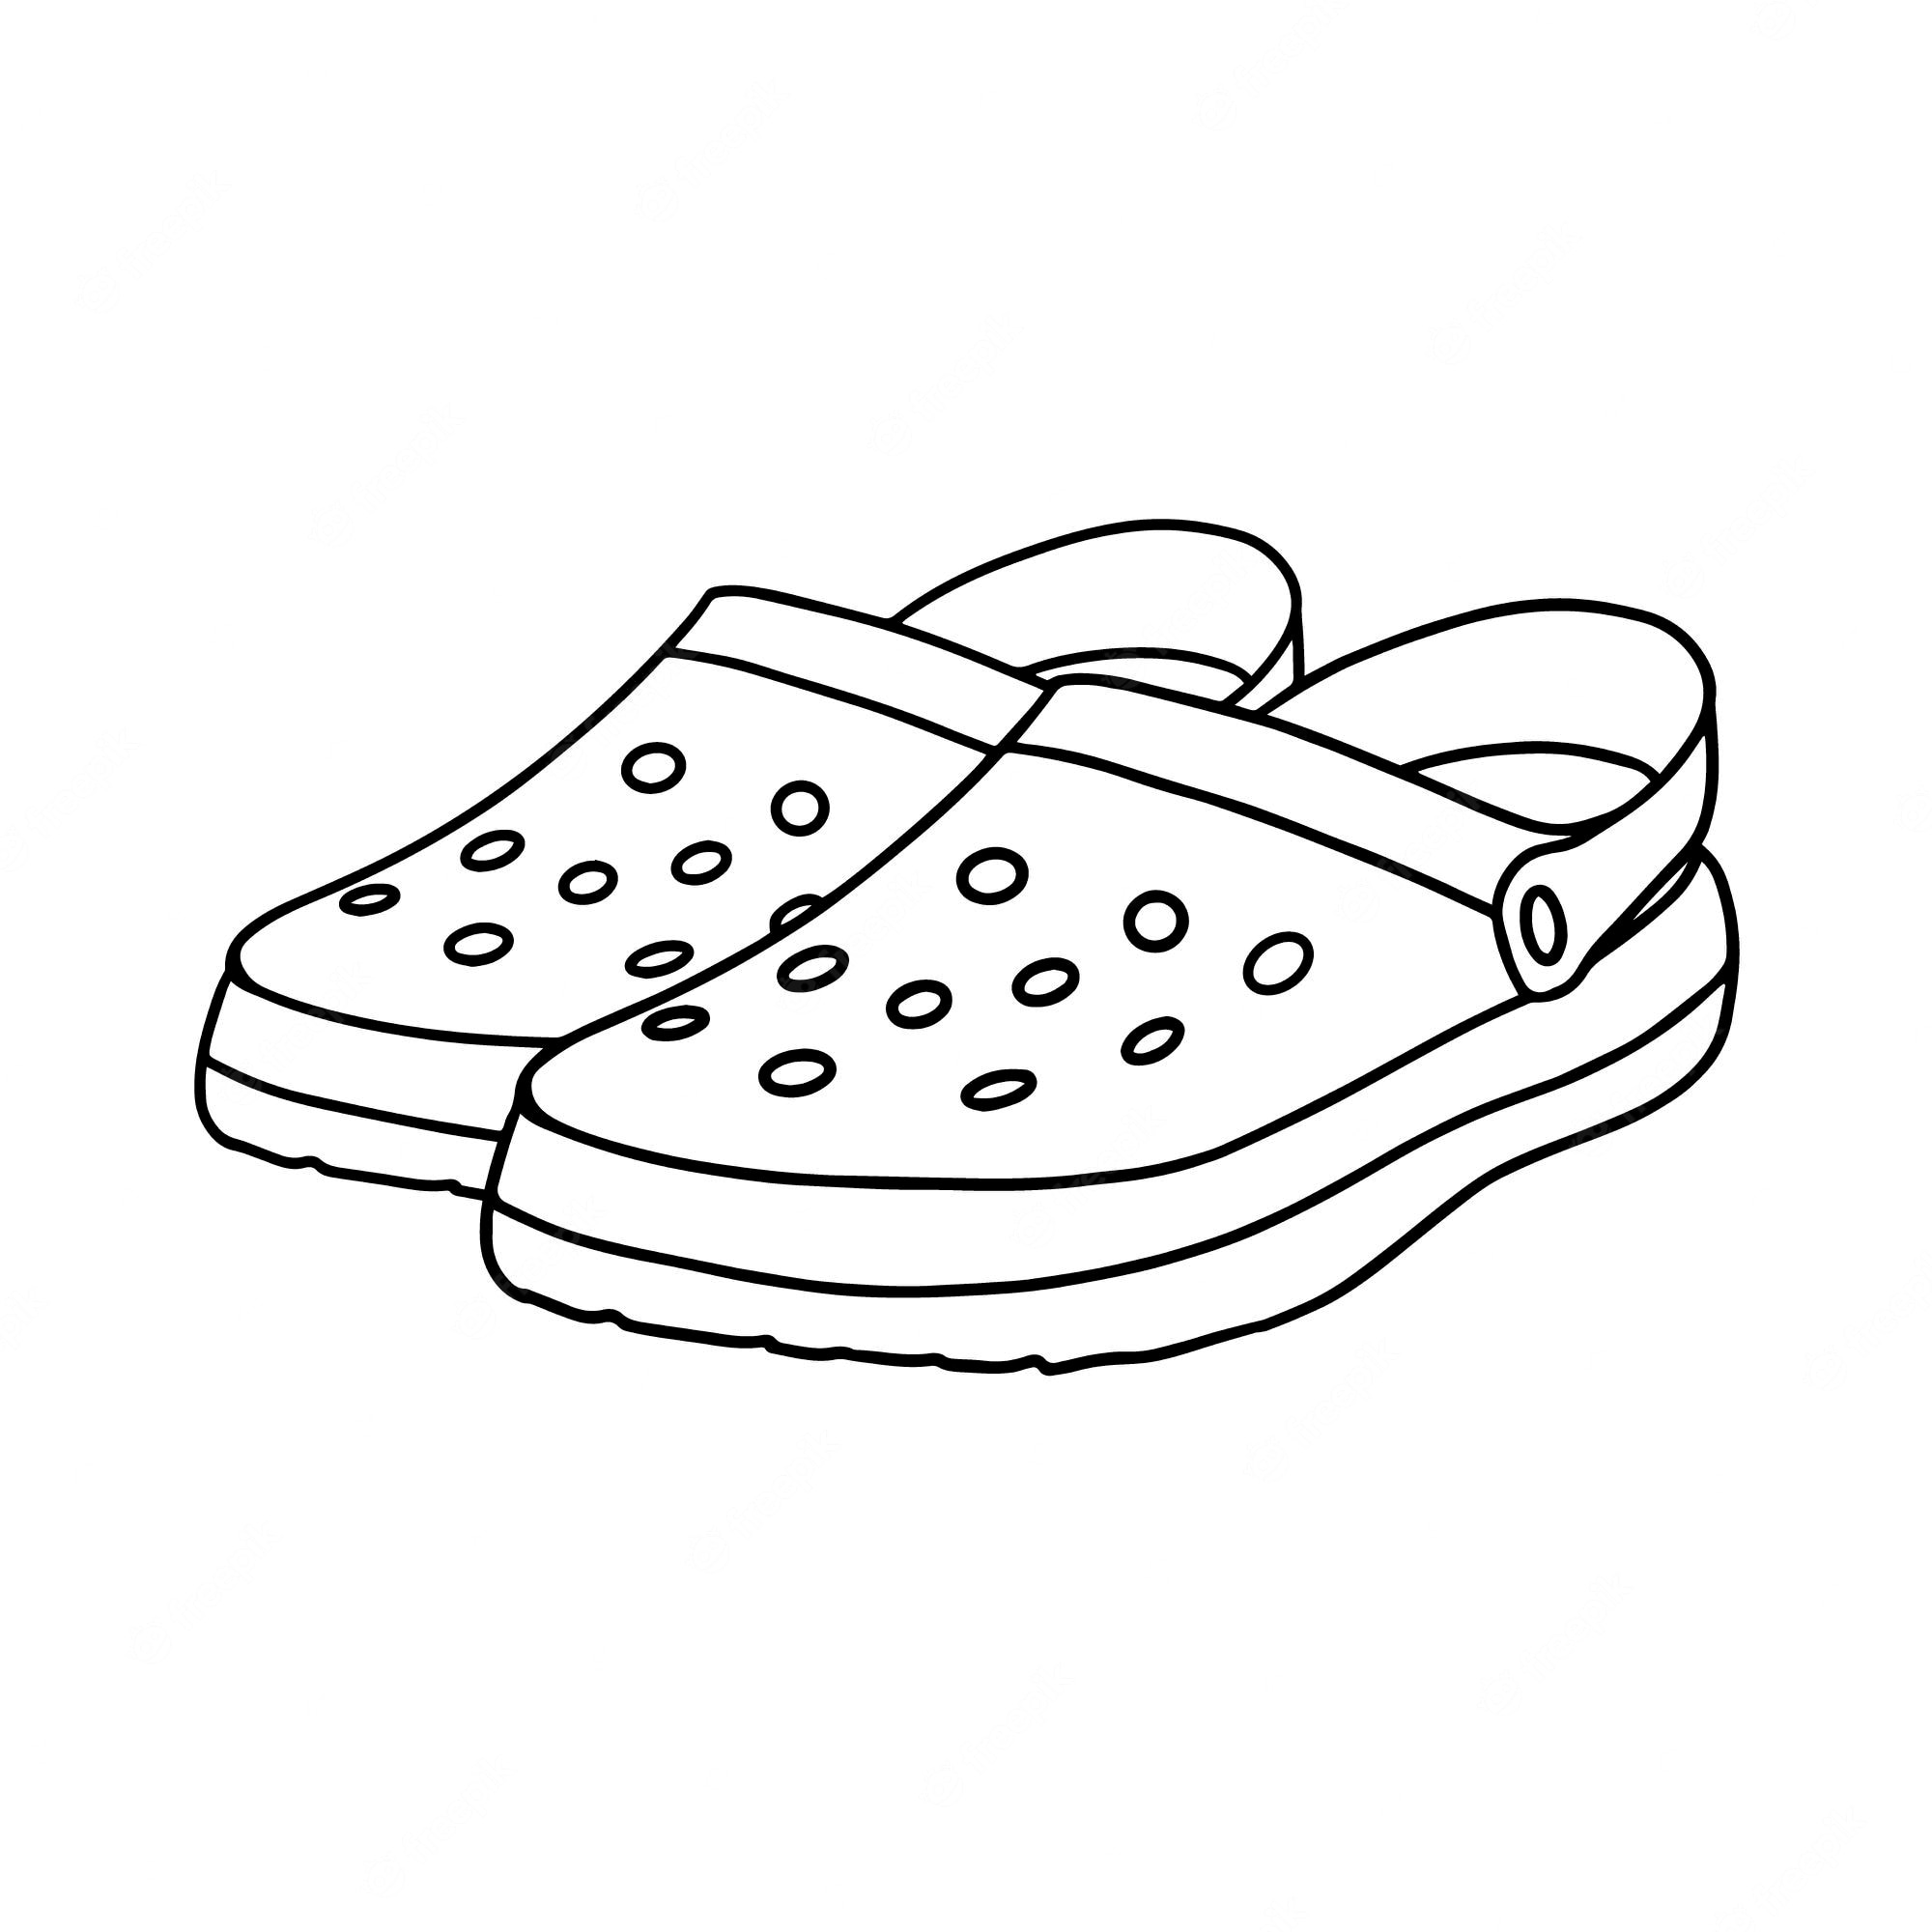 Premium Vector | Crocs isolated on a white background